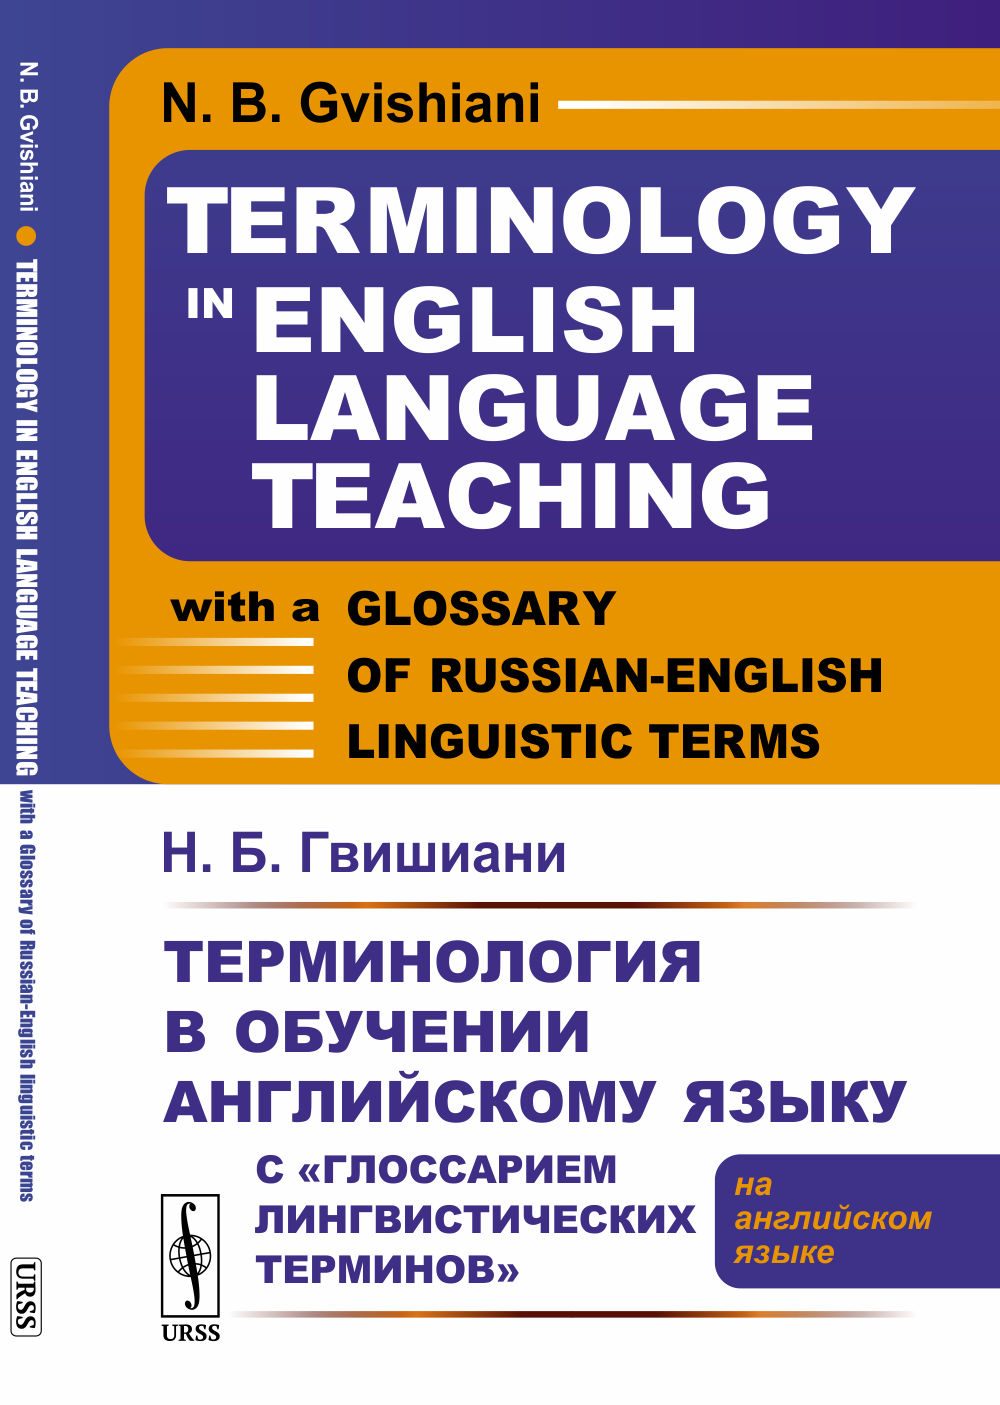         : (  ) // Terminology in English Language Teaching with a Glossary of Russian-English linguistic terms